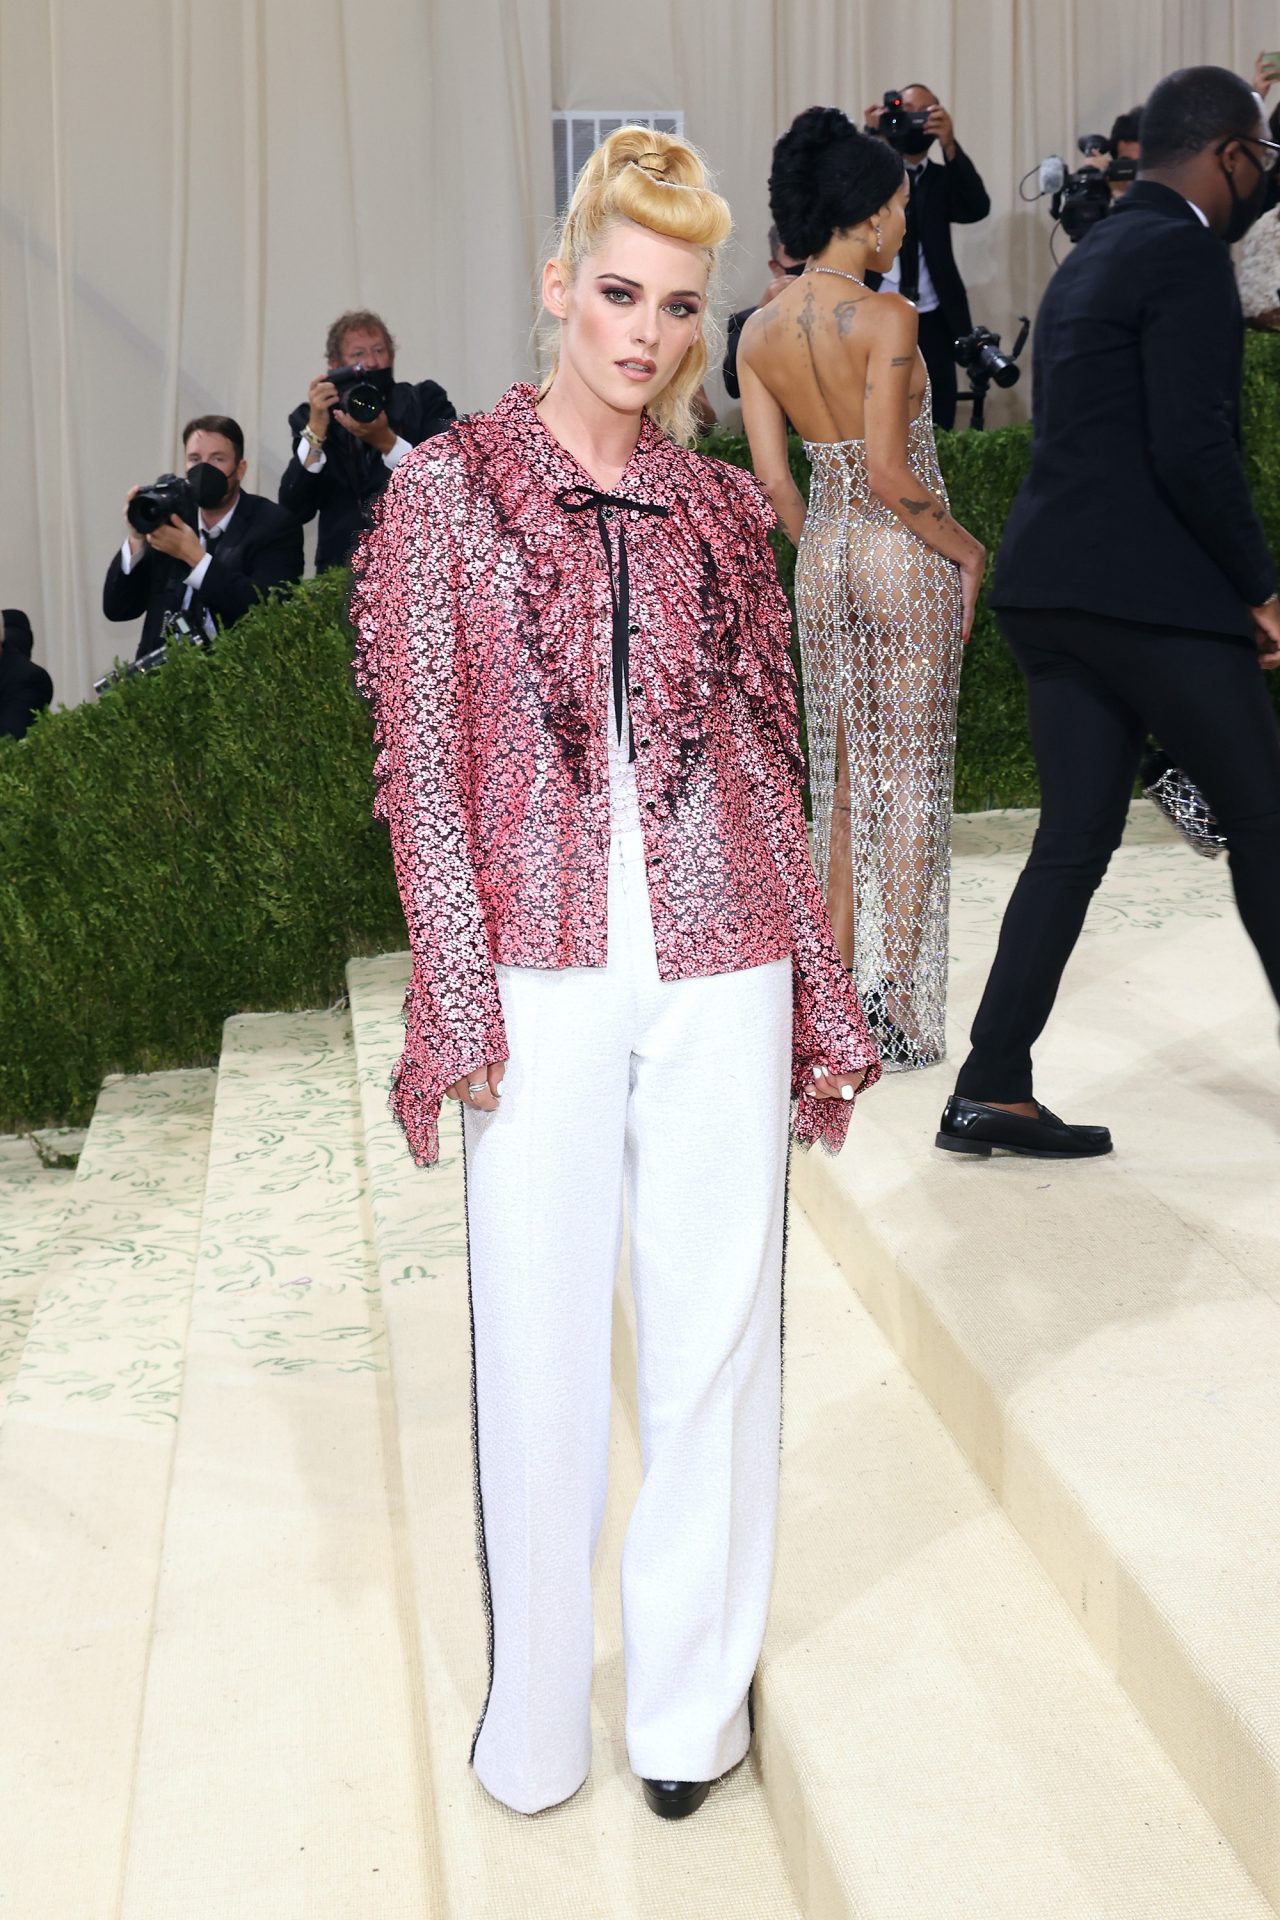 NEW YORK, NEW YORK - SEPTEMBER 13: Kristen Stewart attends the 2021 Met Gala benefit "In America: A Lexicon of Fashion" at Metropolitan Museum of Art on September 13, 2021 in New York City. (Photo by Taylor Hill/WireImage)